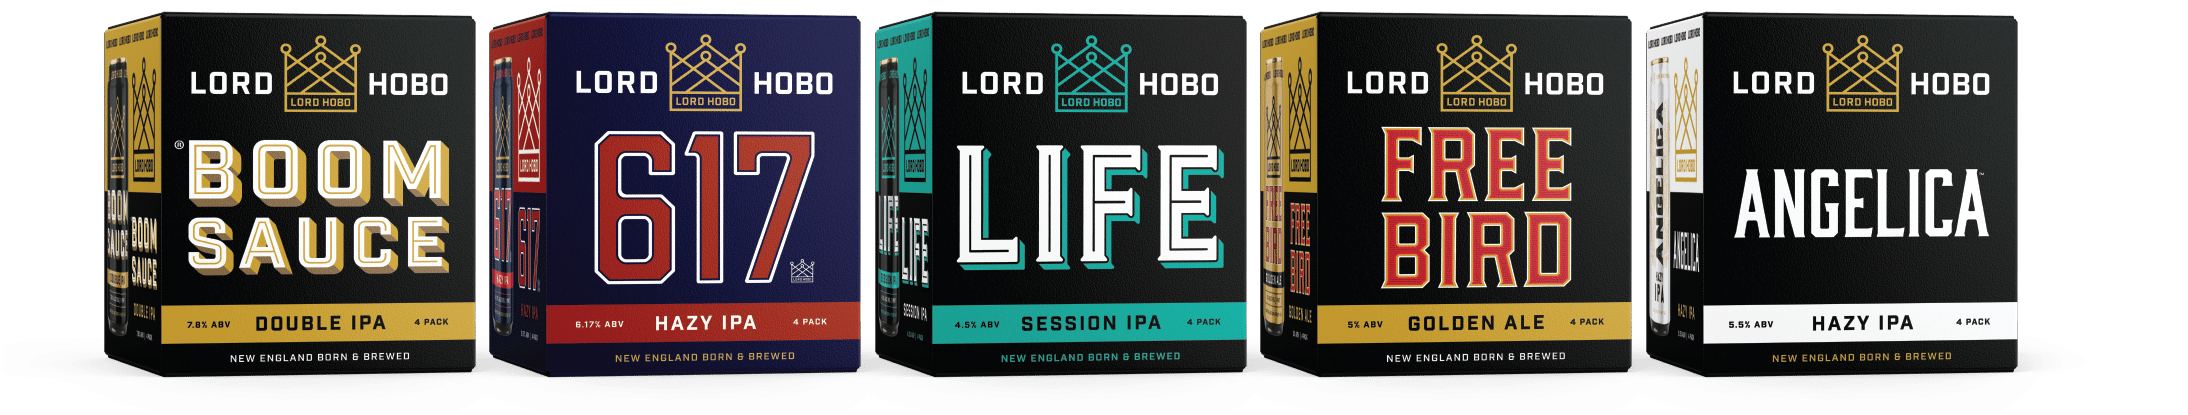 Lord Hobo Undergoes a Rebrand | Mass Brew Bros